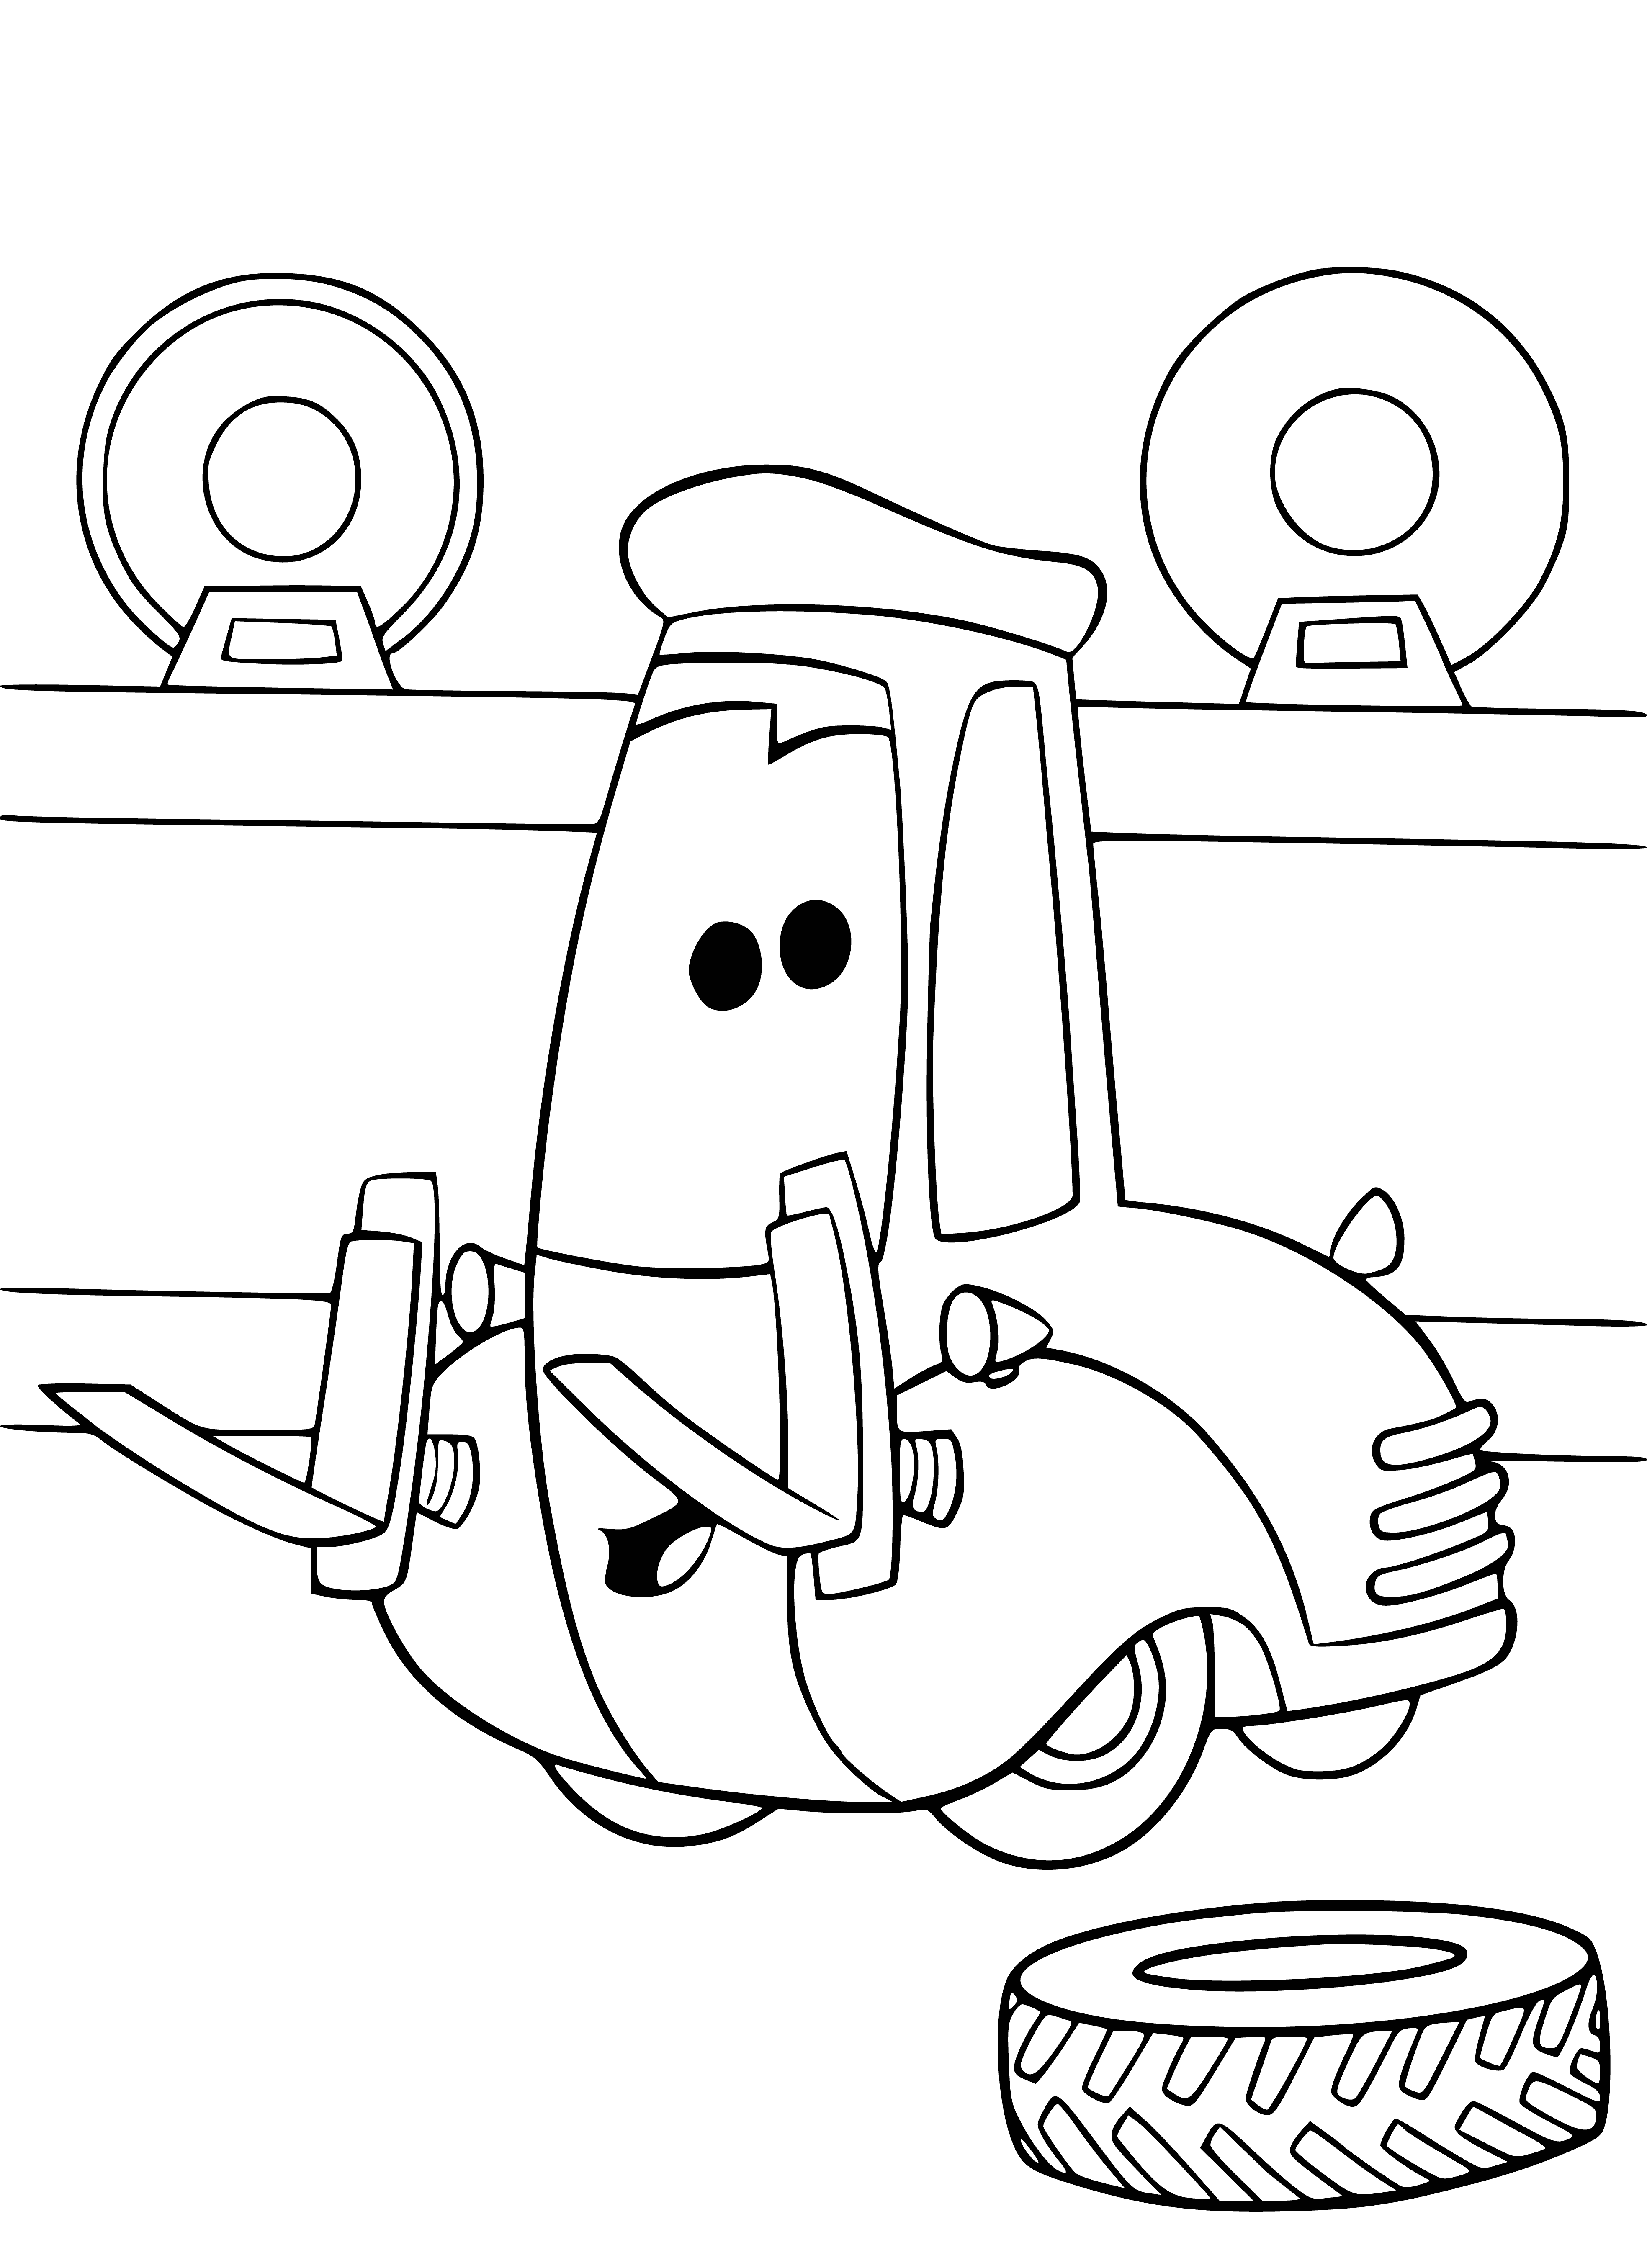 McQueen's friends coloring page